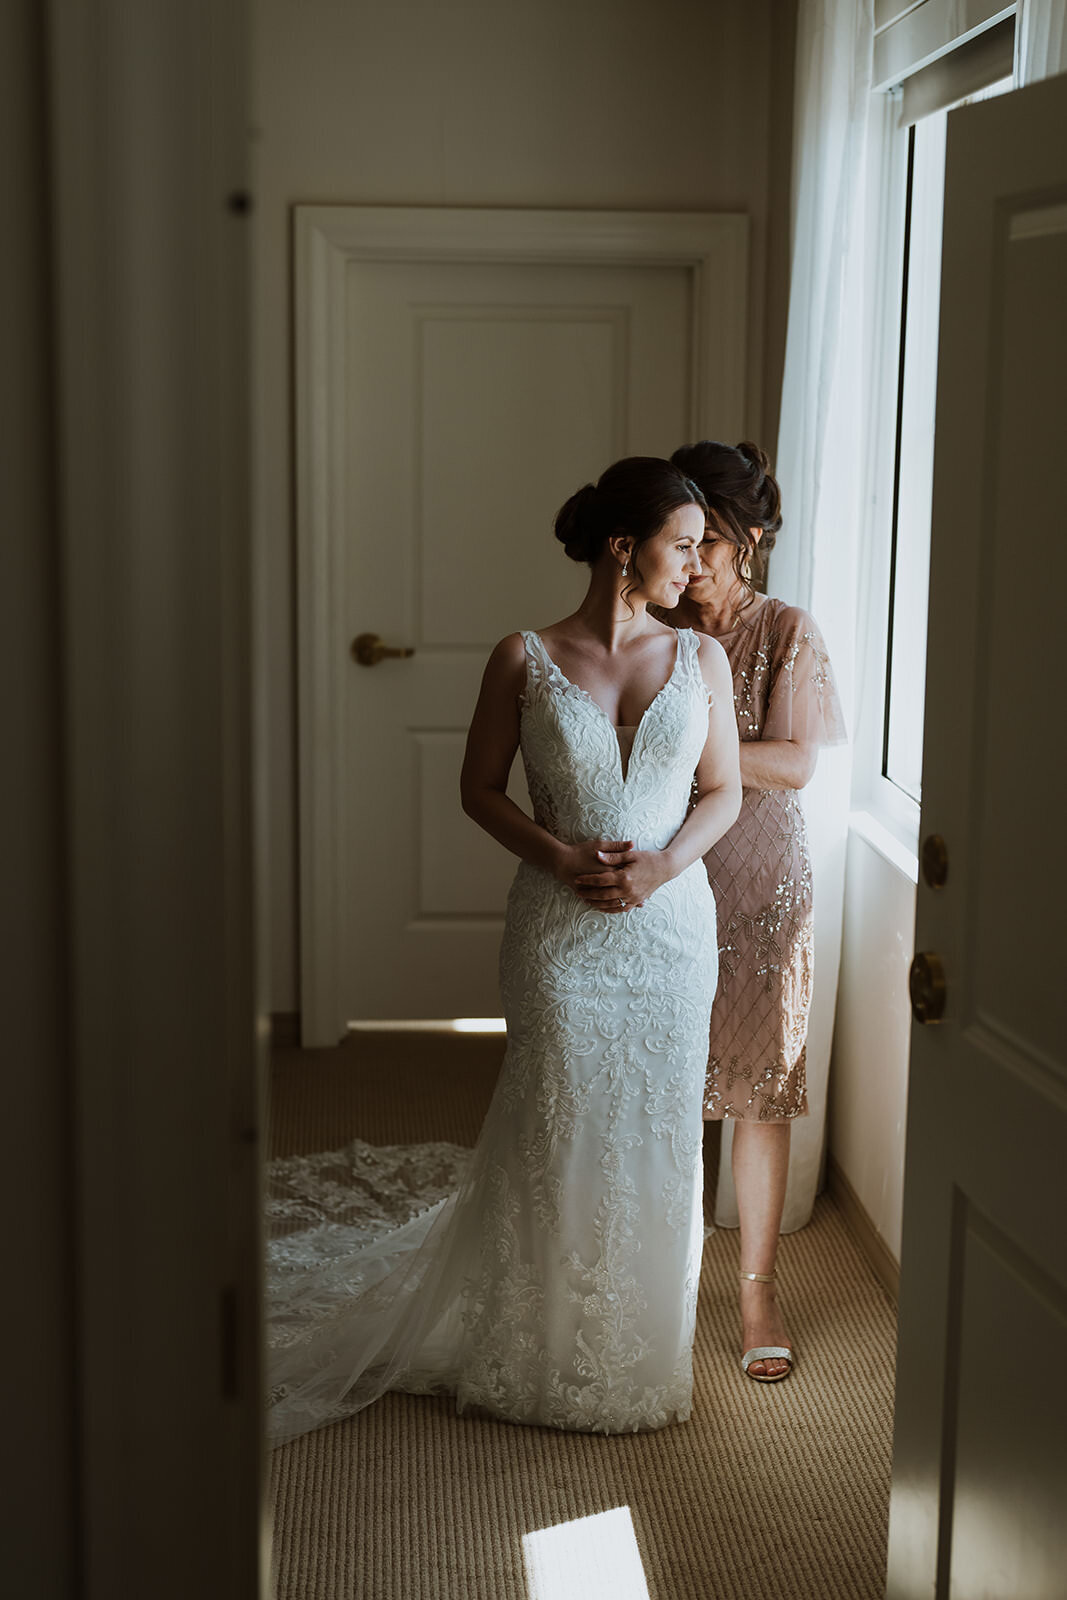 bride getting help from her mother to get into her wedding dress